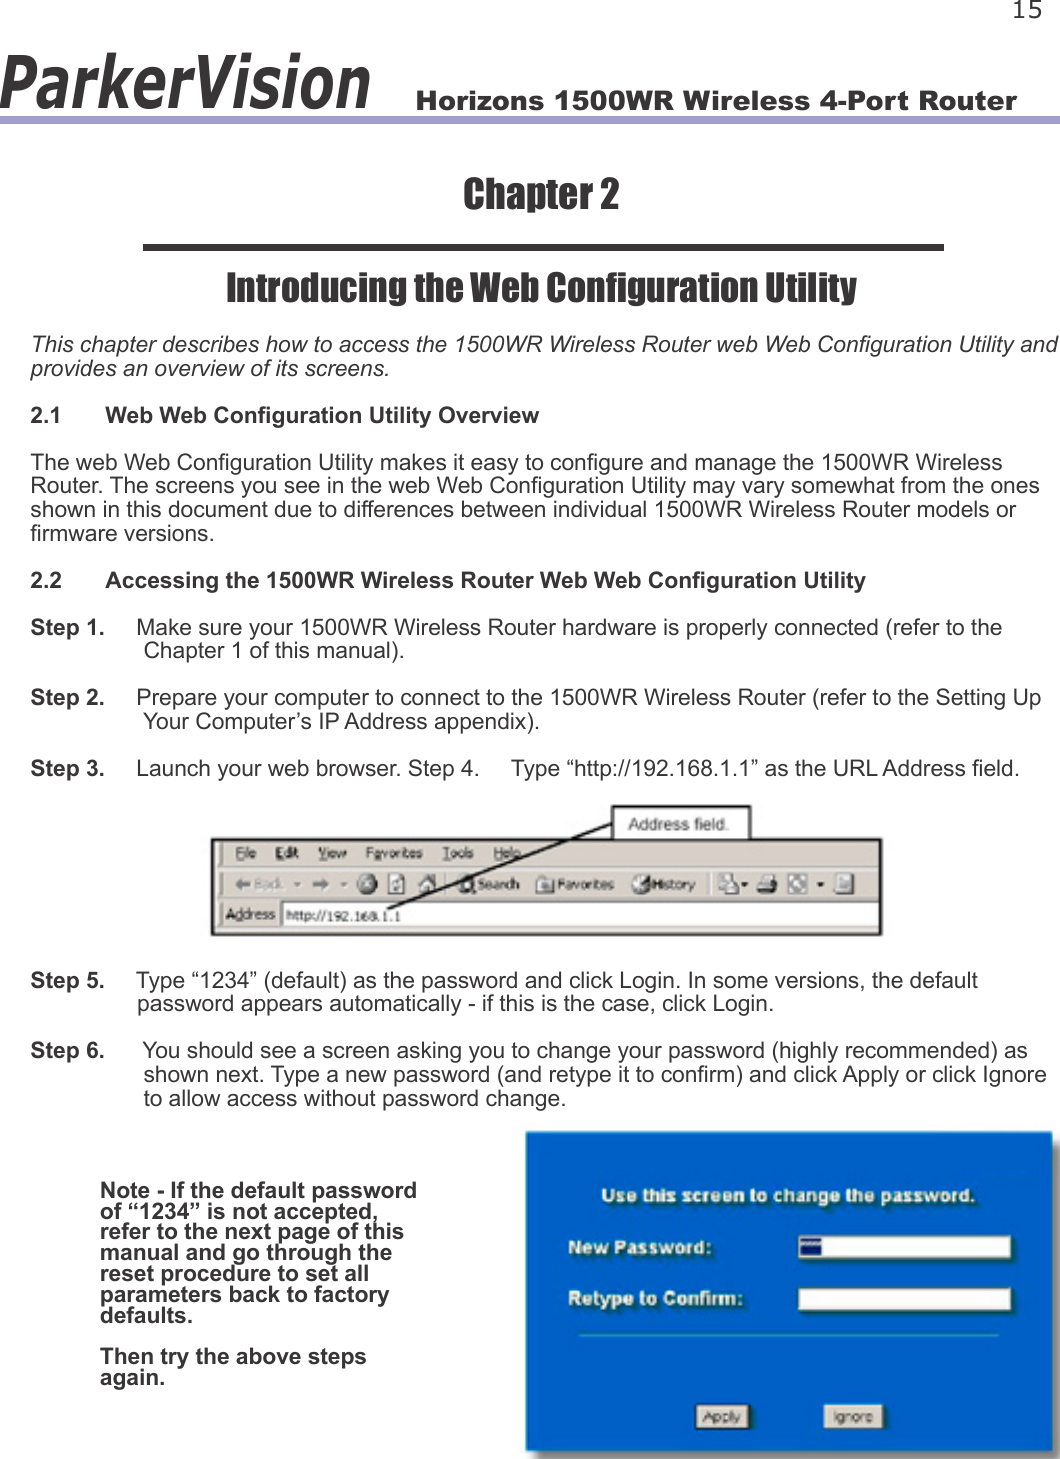 Horizons 1500WR Wireless 4-Port Router 15ParkerVisionChapter 2Introducing the Web Conguration UtilityThis chapter describes how to access the 1500WR Wireless Router web Web Conguration Utility and provides an overview of its screens.2.1  Web Web Conguration Utility OverviewThe web Web Conguration Utility makes it easy to congure and manage the 1500WR Wireless Router. The screens you see in the web Web Conguration Utility may vary somewhat from the ones shown in this document due to differences between individual 1500WR Wireless Router models or rmware versions.2.2  Accessing the 1500WR Wireless Router Web Web Conguration UtilityStep 1.     Make sure your 1500WR Wireless Router hardware is properly connected (refer to the                   Chapter 1 of this manual).Step 2.     Prepare your computer to connect to the 1500WR Wireless Router (refer to the Setting Up                   Your Computer’s IP Address appendix). Step 3.     Launch your web browser. Step 4.     Type “http://192.168.1.1” as the URL Address eld.Step 5.     Type “1234” (default) as the password and click Login. In some versions, the default                  password appears automatically - if this is the case, click Login.Step 6.      You should see a screen asking you to change your password (highly recommended) as                   shown next. Type a new password (and retype it to conrm) and click Apply or click Ignore                   to allow access without password change.Note - If the default password of “1234” is not accepted, refer to the next page of this manual and go through the reset procedure to set all parameters back to factory defaults. Then try the above steps again.